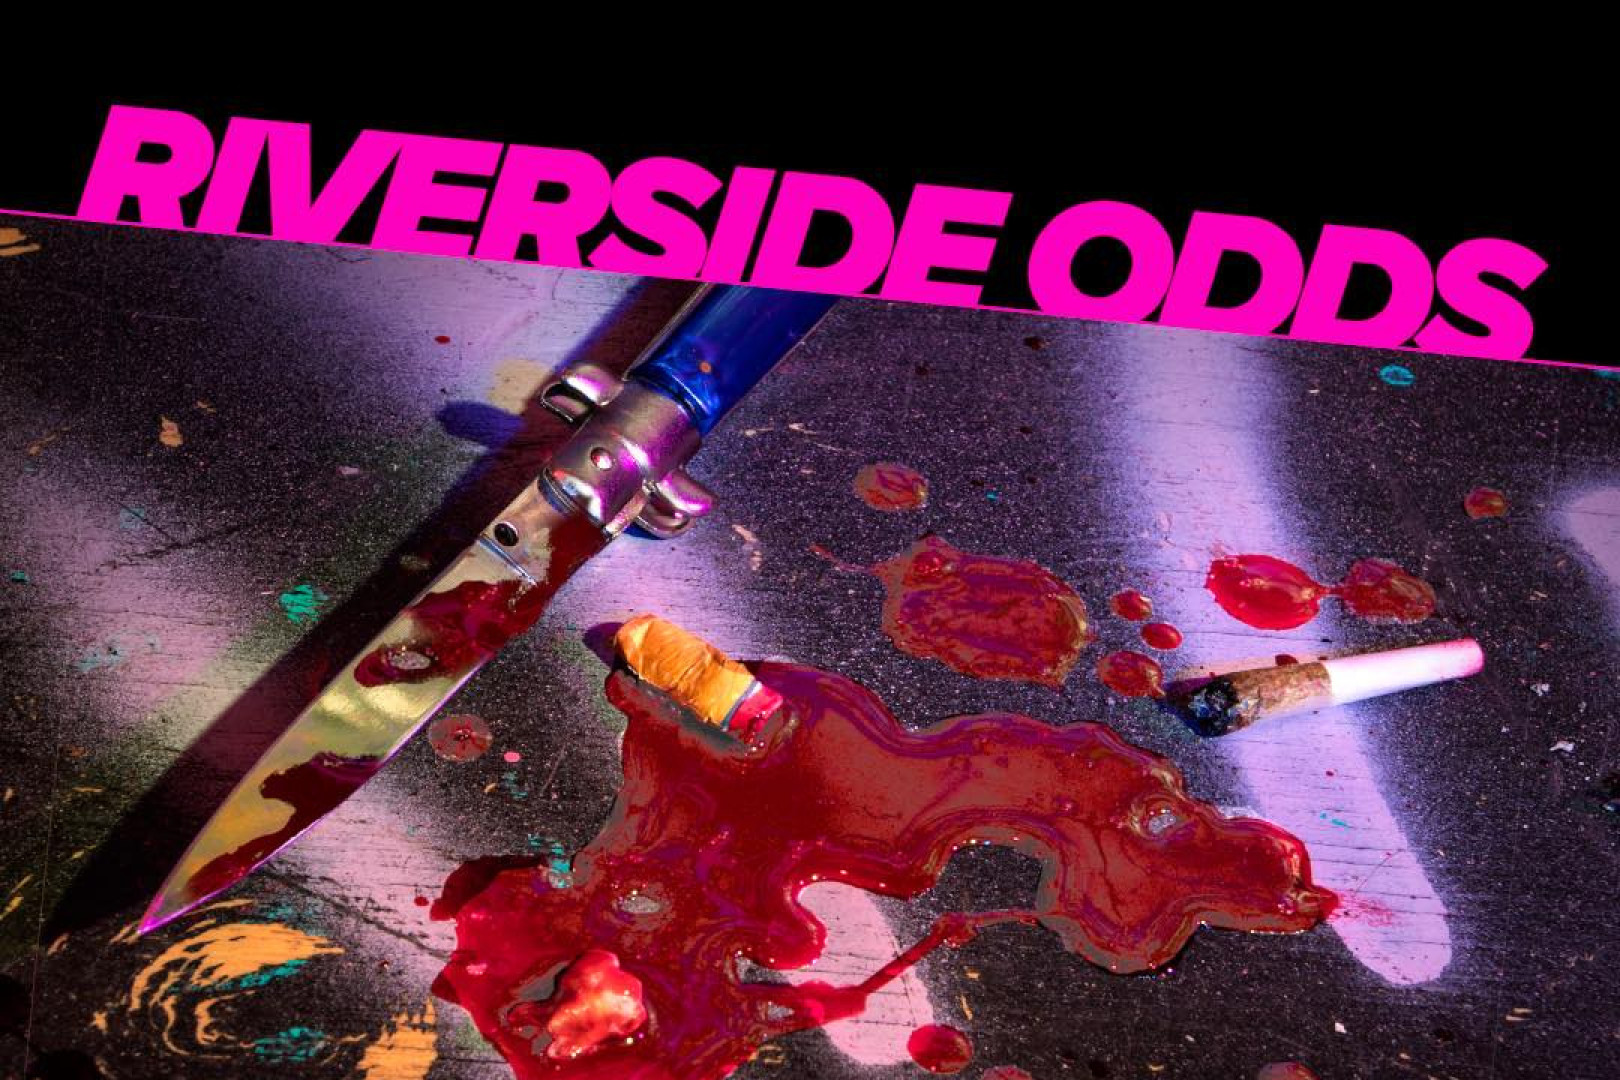 Riverside Odds release new LP, go on tour